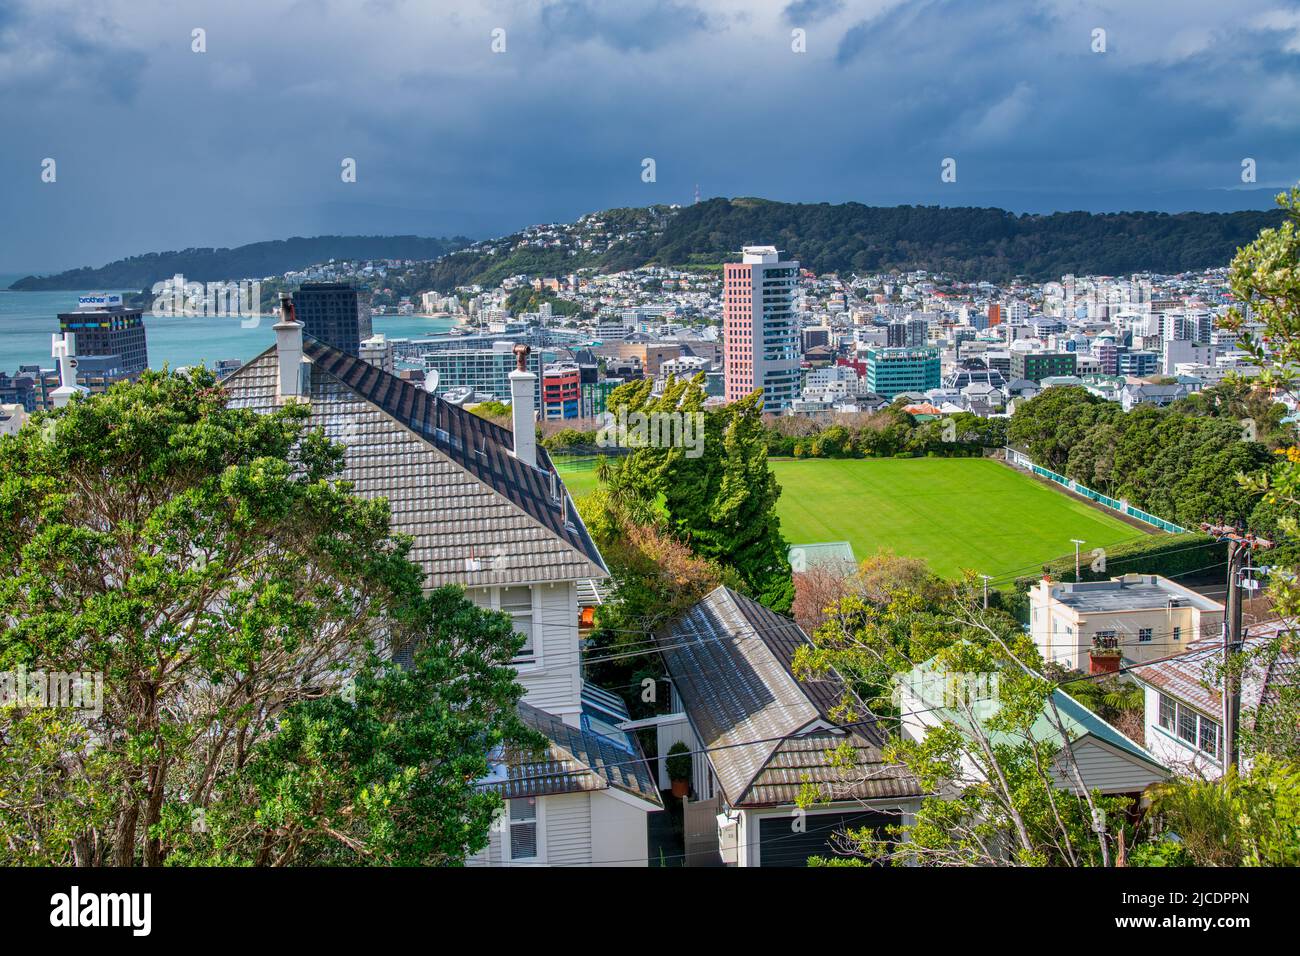 Wellington, New Zealand - September 5, 2018: Aerial view of the city from the top of a hill in spring season. Stock Photo